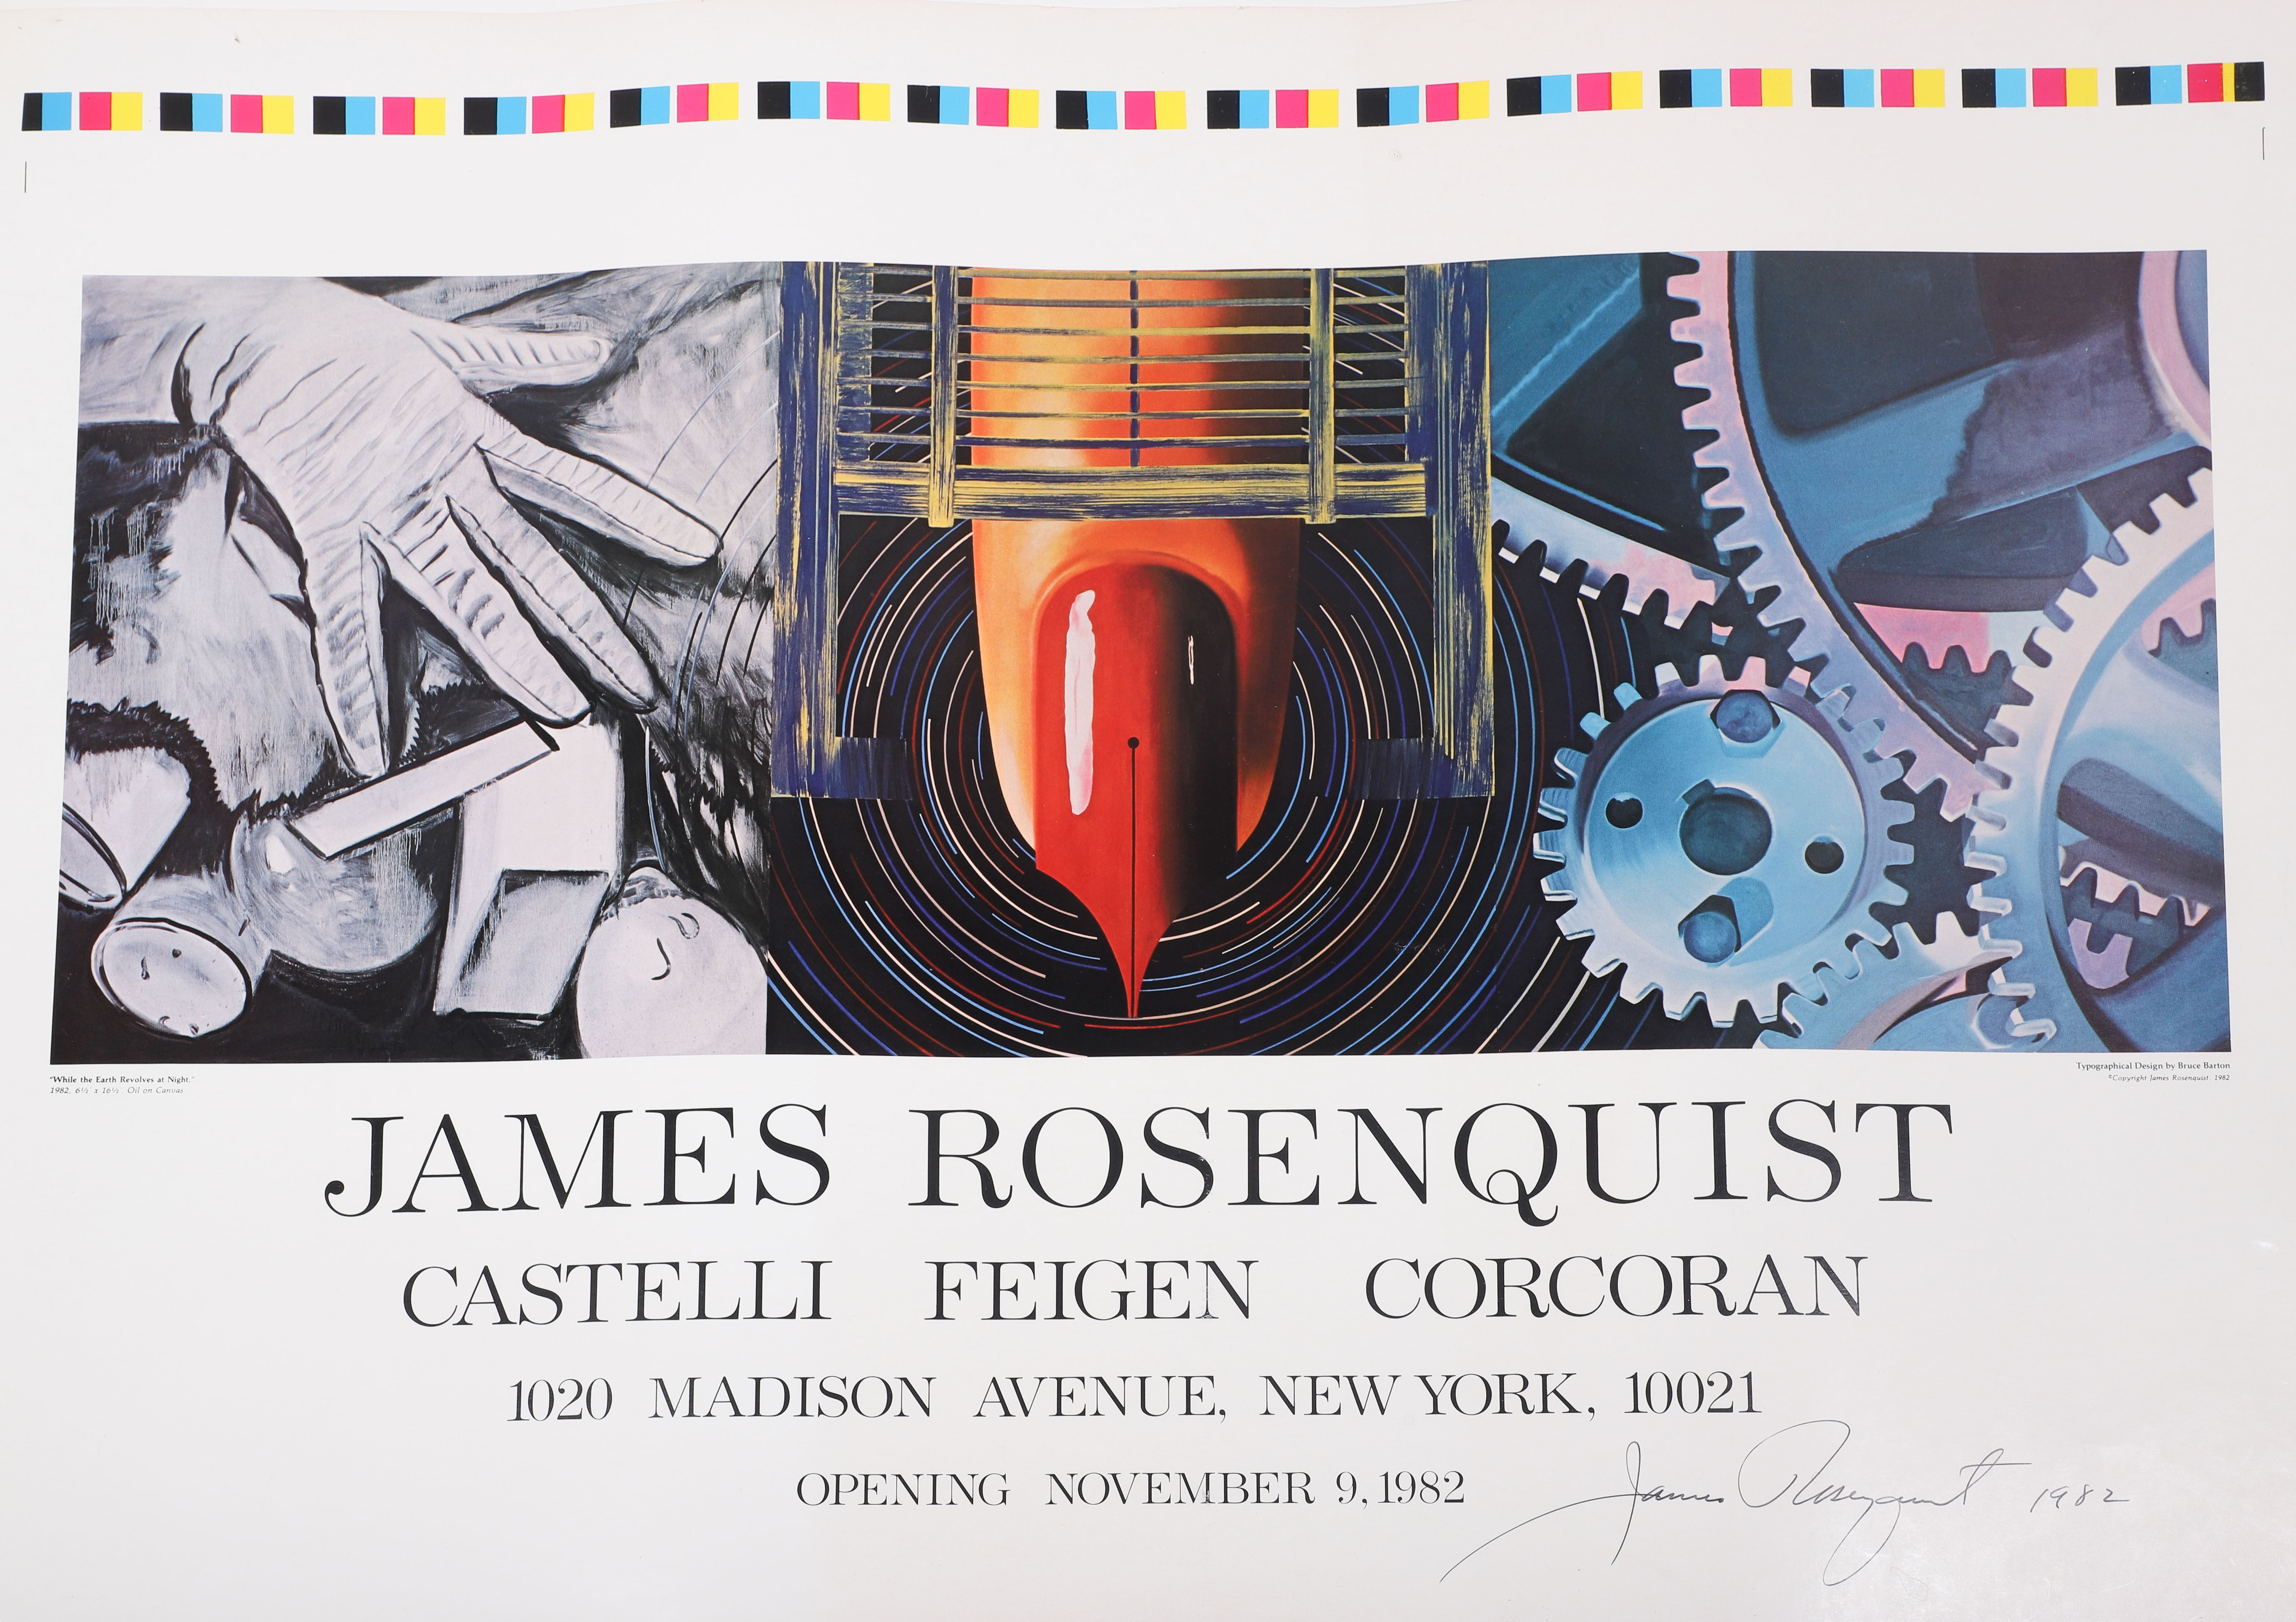  5 James Rosenquist signed posters 2e1986